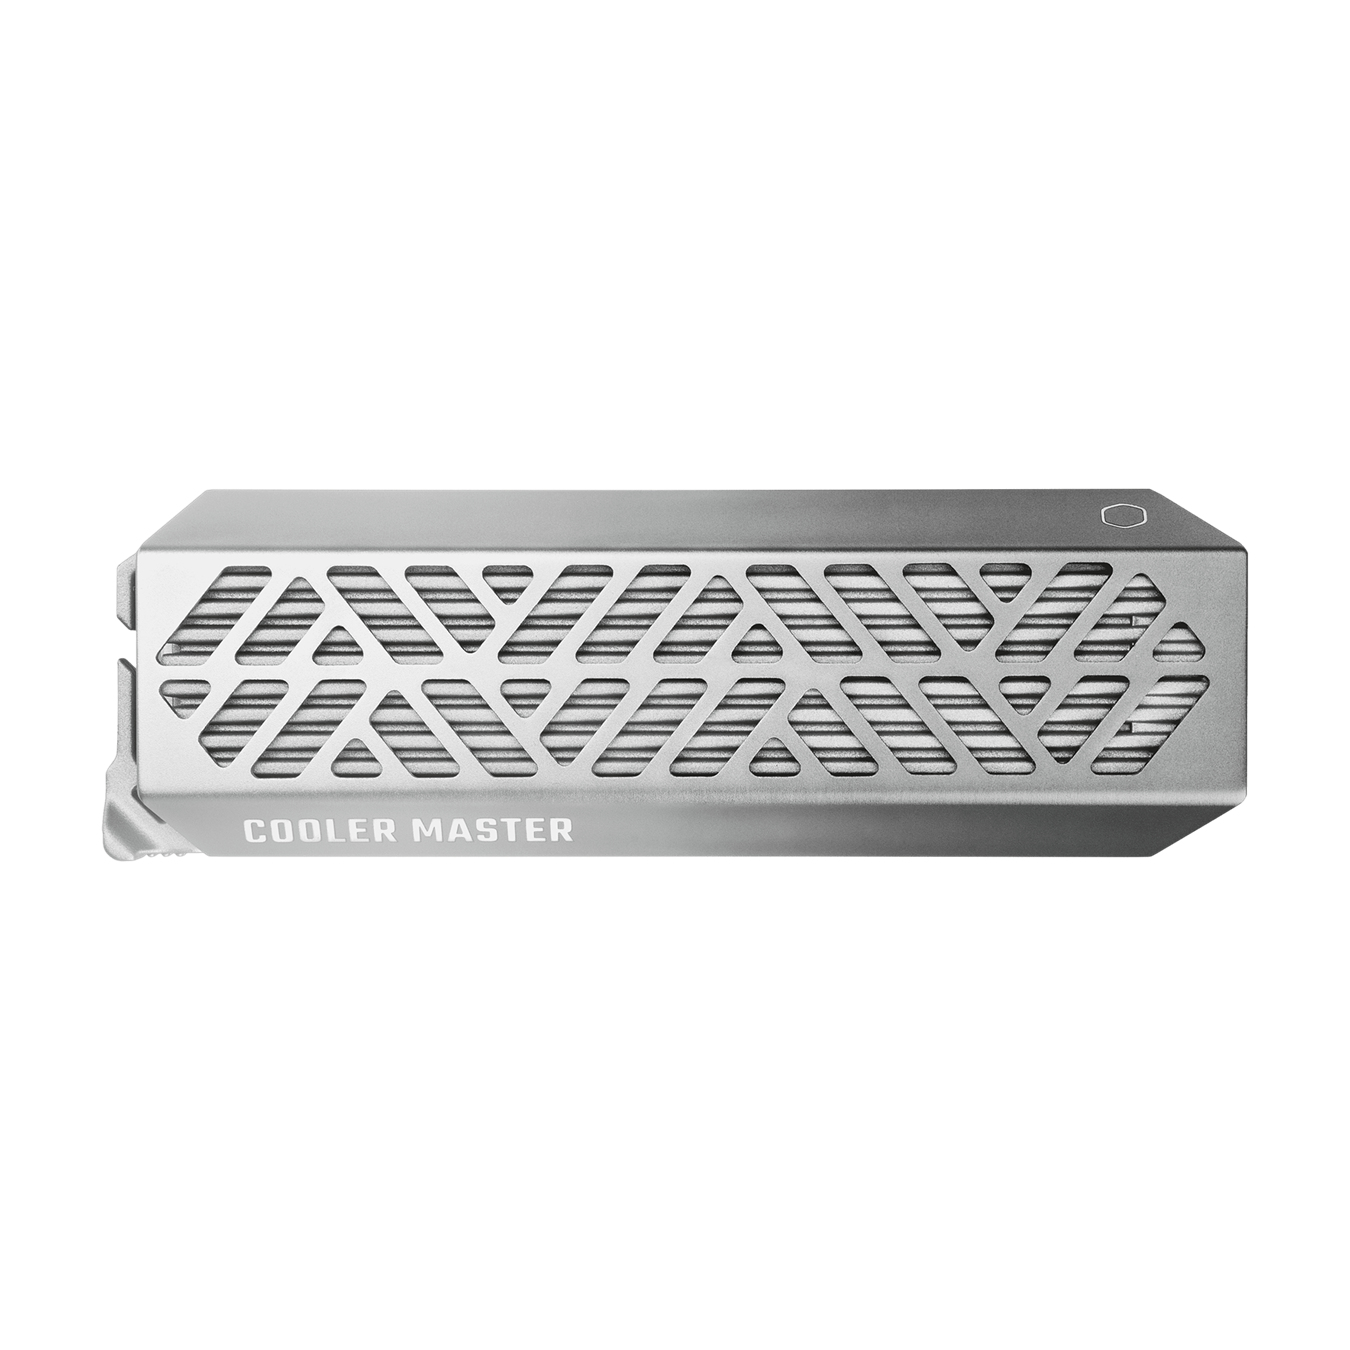 Cooler Master Externe M.2 SSD Behuizing Oracle Air